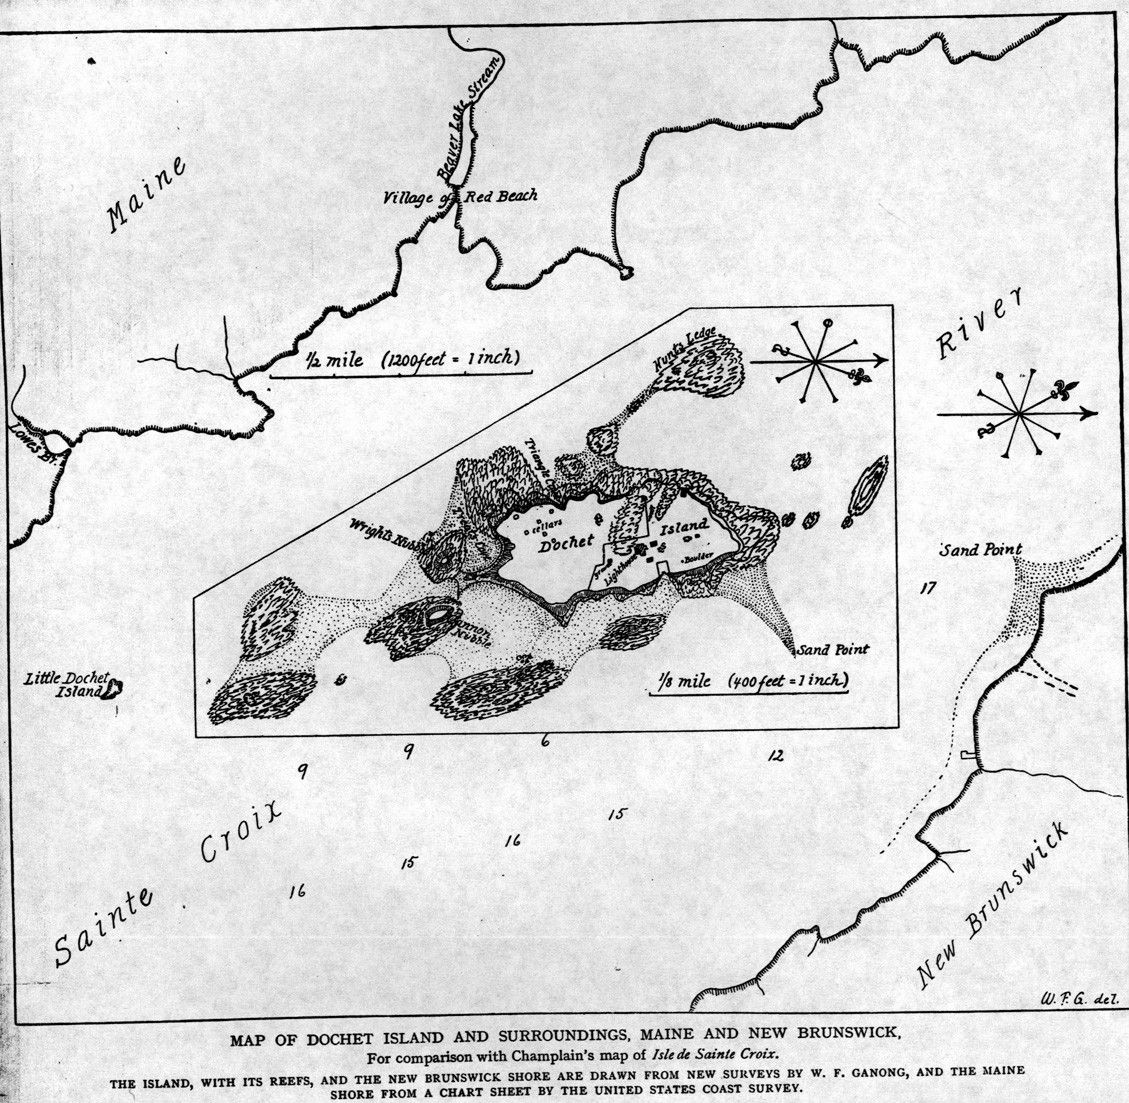 The island, with its reefs and the New Brunswick shore, are drawn from surveys done by W. F. Ganong and the Maine shore from a chart sheet by the United States Coast Survey.